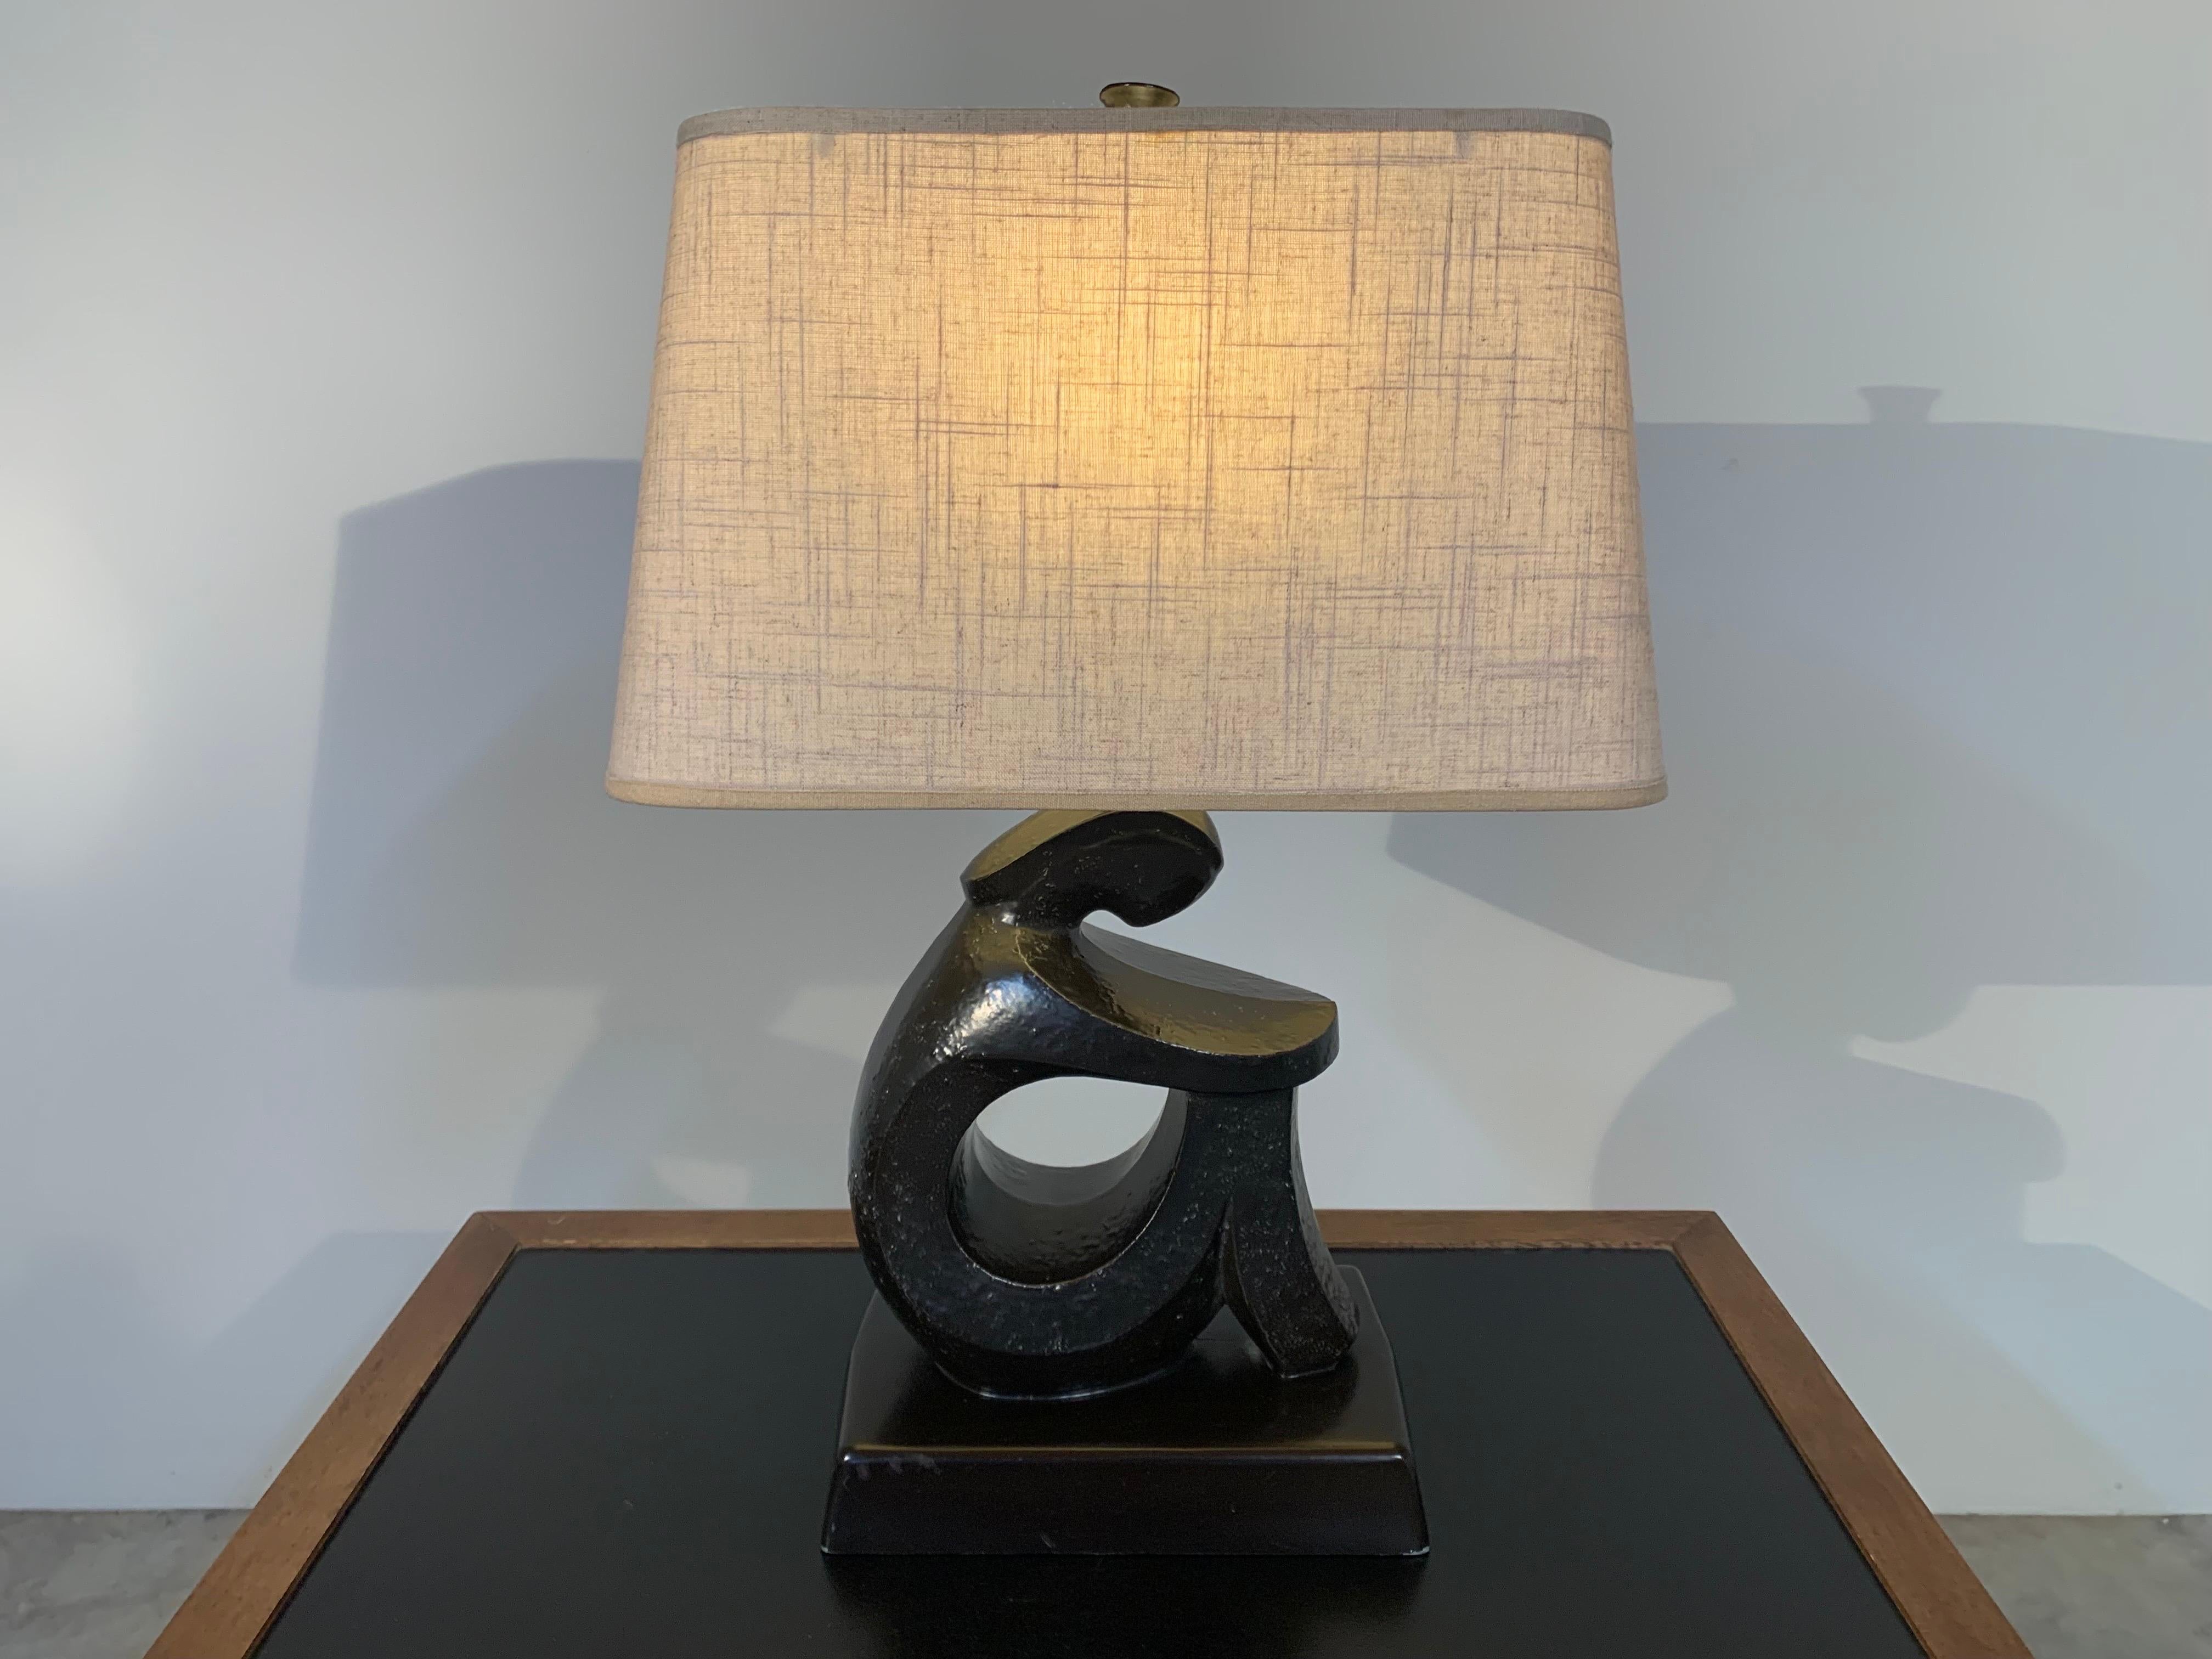 A fetching sculptural figure table lamp designed by Frederick Weinberg circa 1950 having cast aluminum sculpture with deep brown tone. A beautiful addition to any mid-century modern collection. Offered at a fantastic price and in outstanding